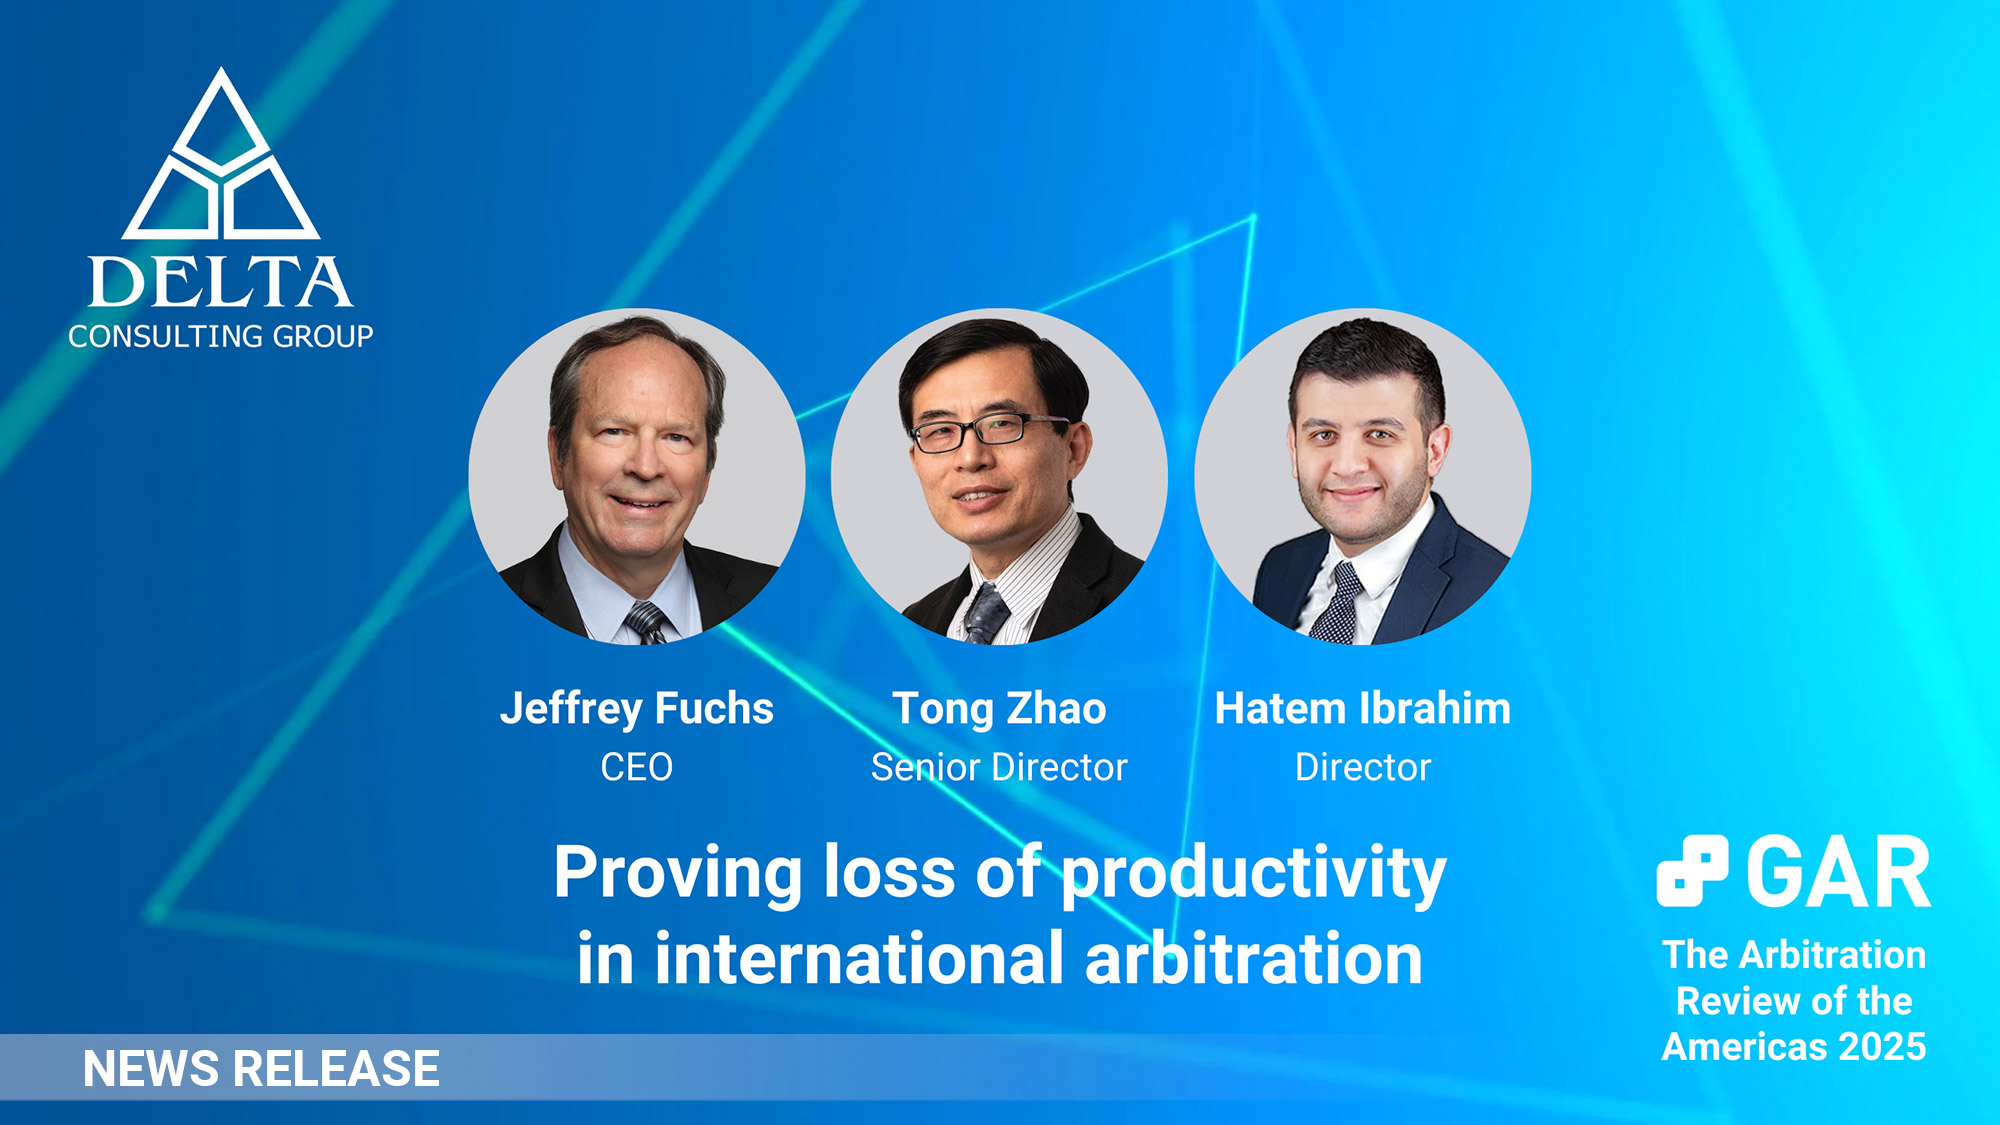 GAR Publishes Article, “Proving Loss of Productivity in International Arbitration,” Authored by Delta’s Jeff Fuchs, Hatem Ibrahim, and Tong Zhao